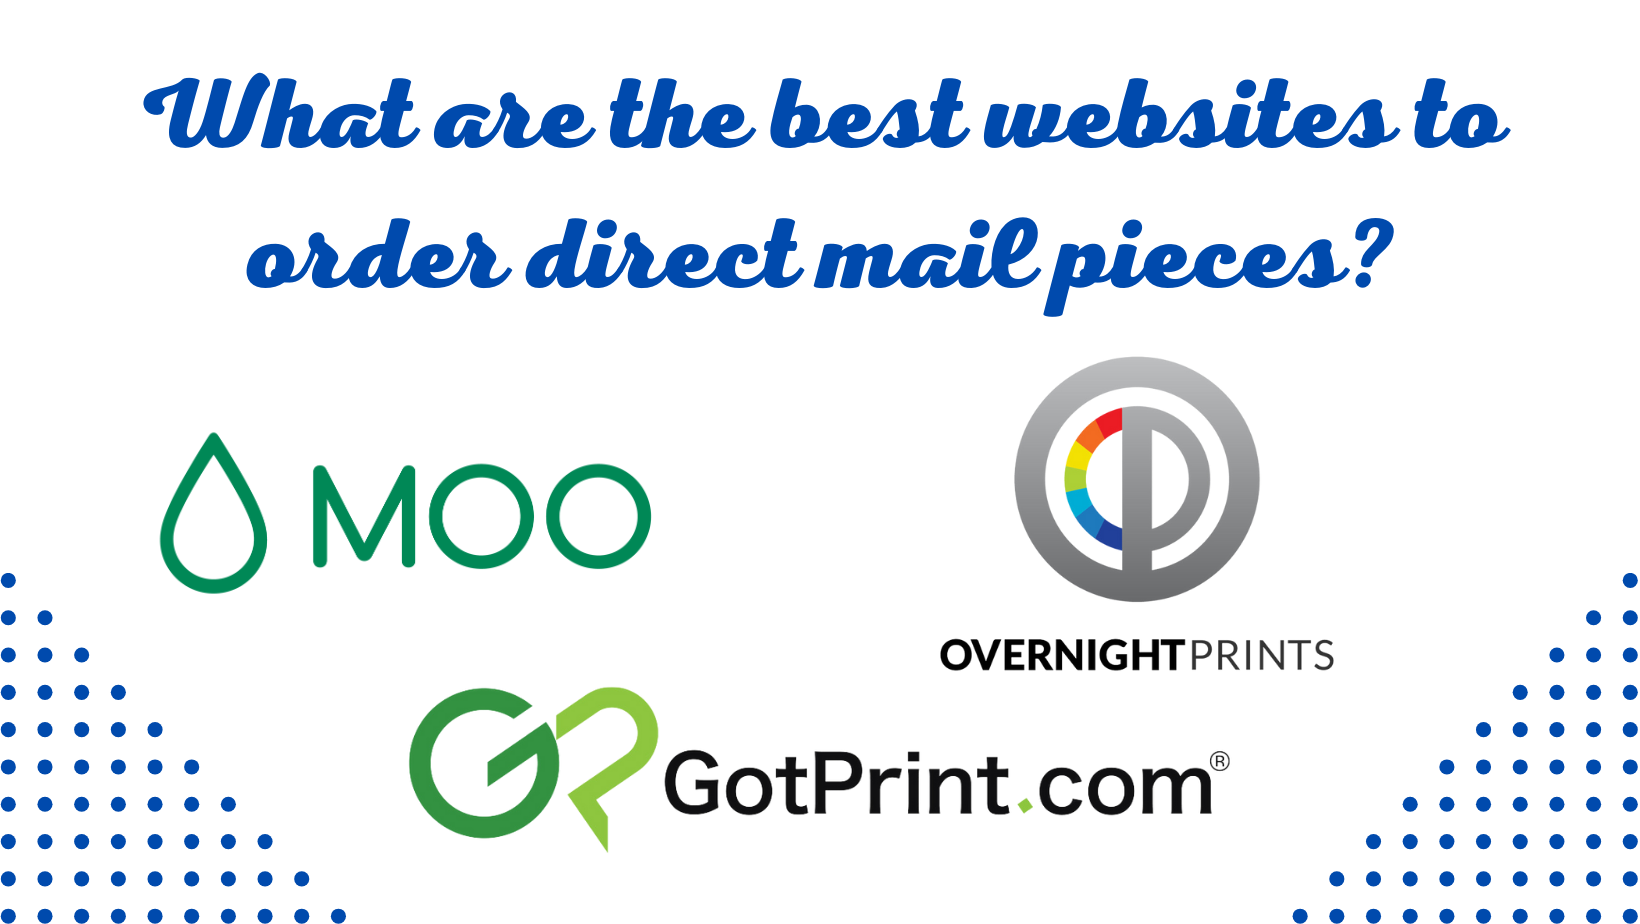 What are the best websites to order direct mail pieces?